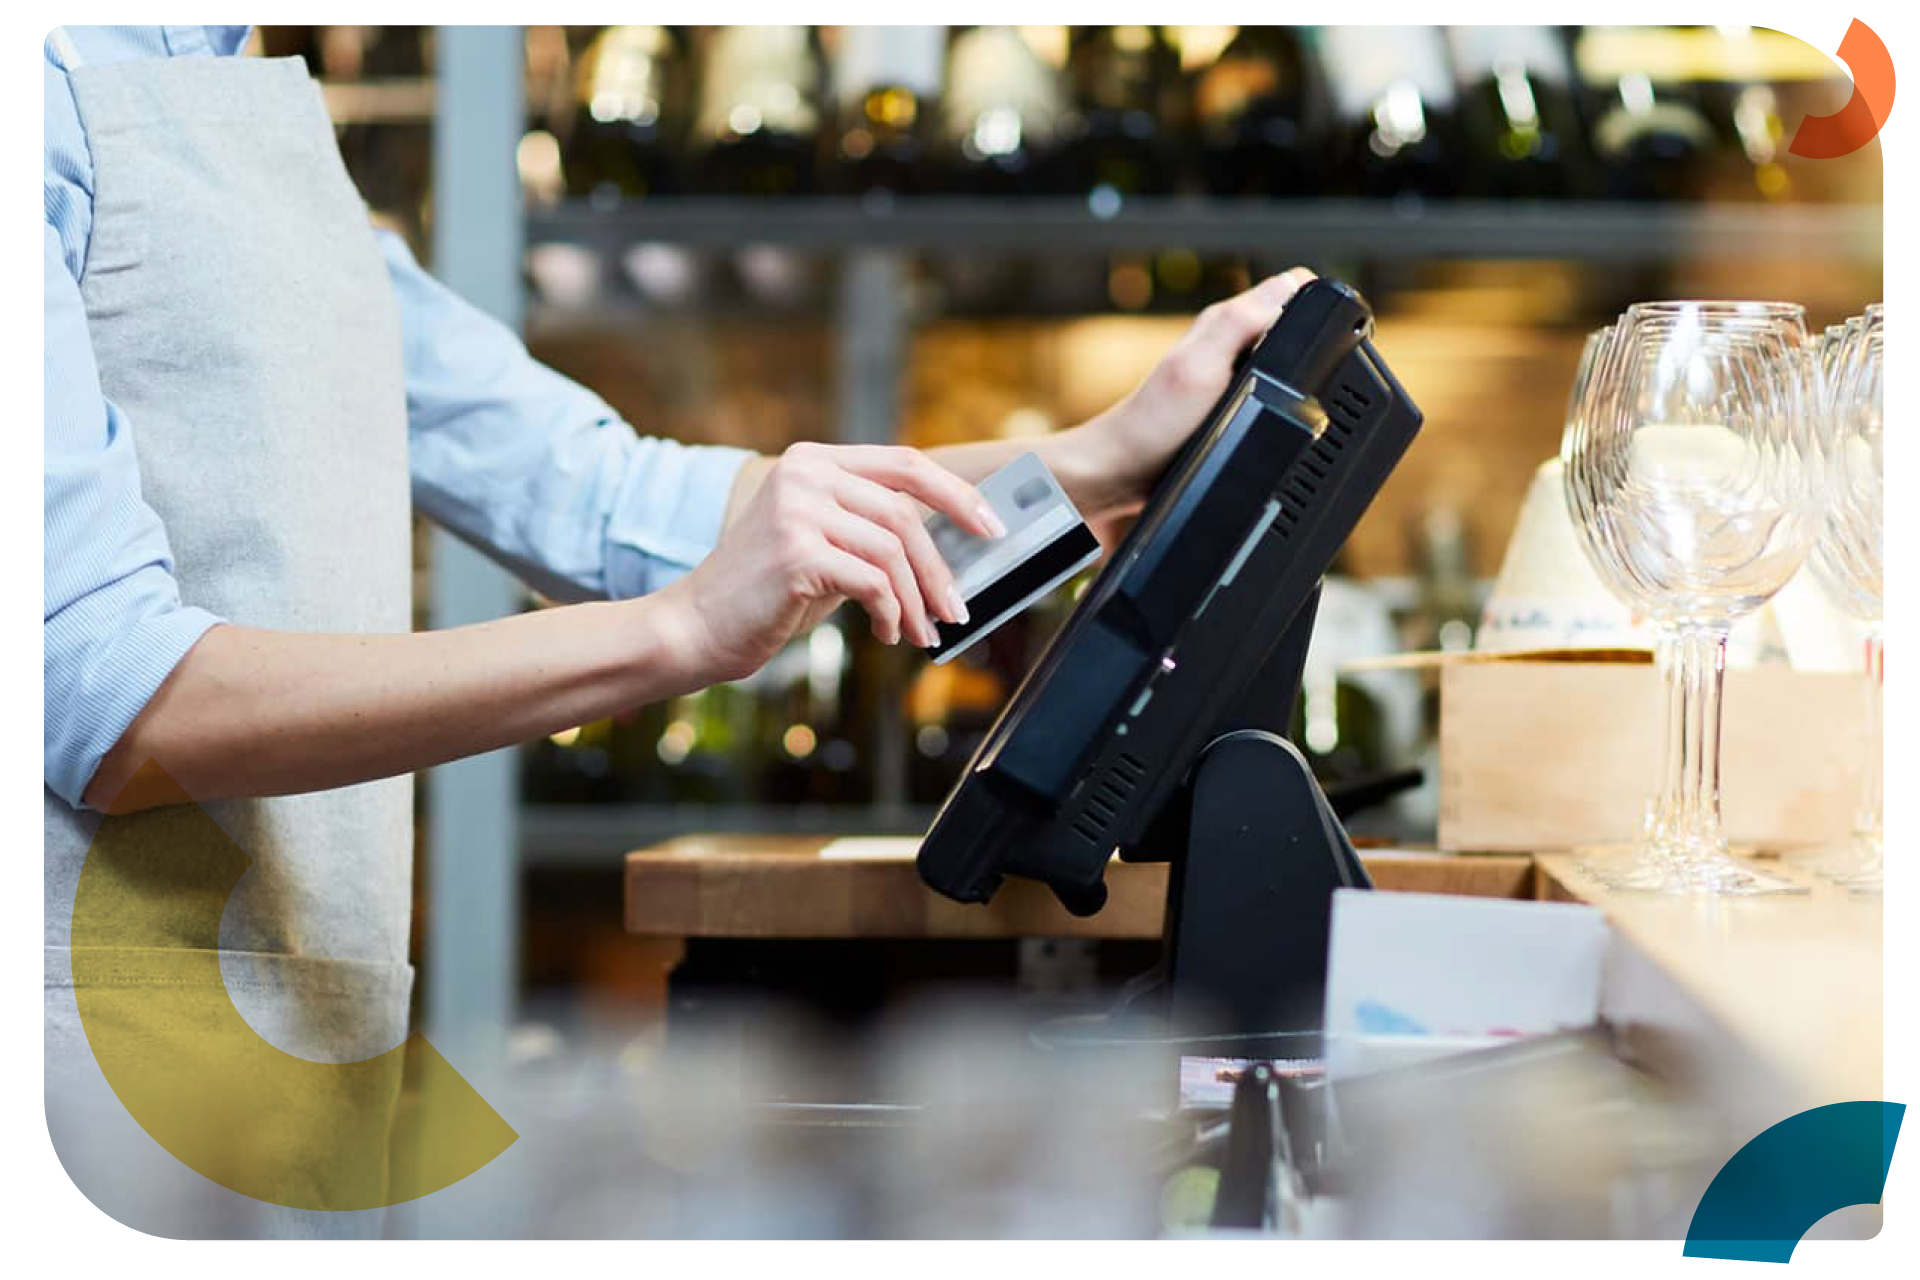 A narrow shot of a restaurant worker swiping a credit card with wine glasses in the background